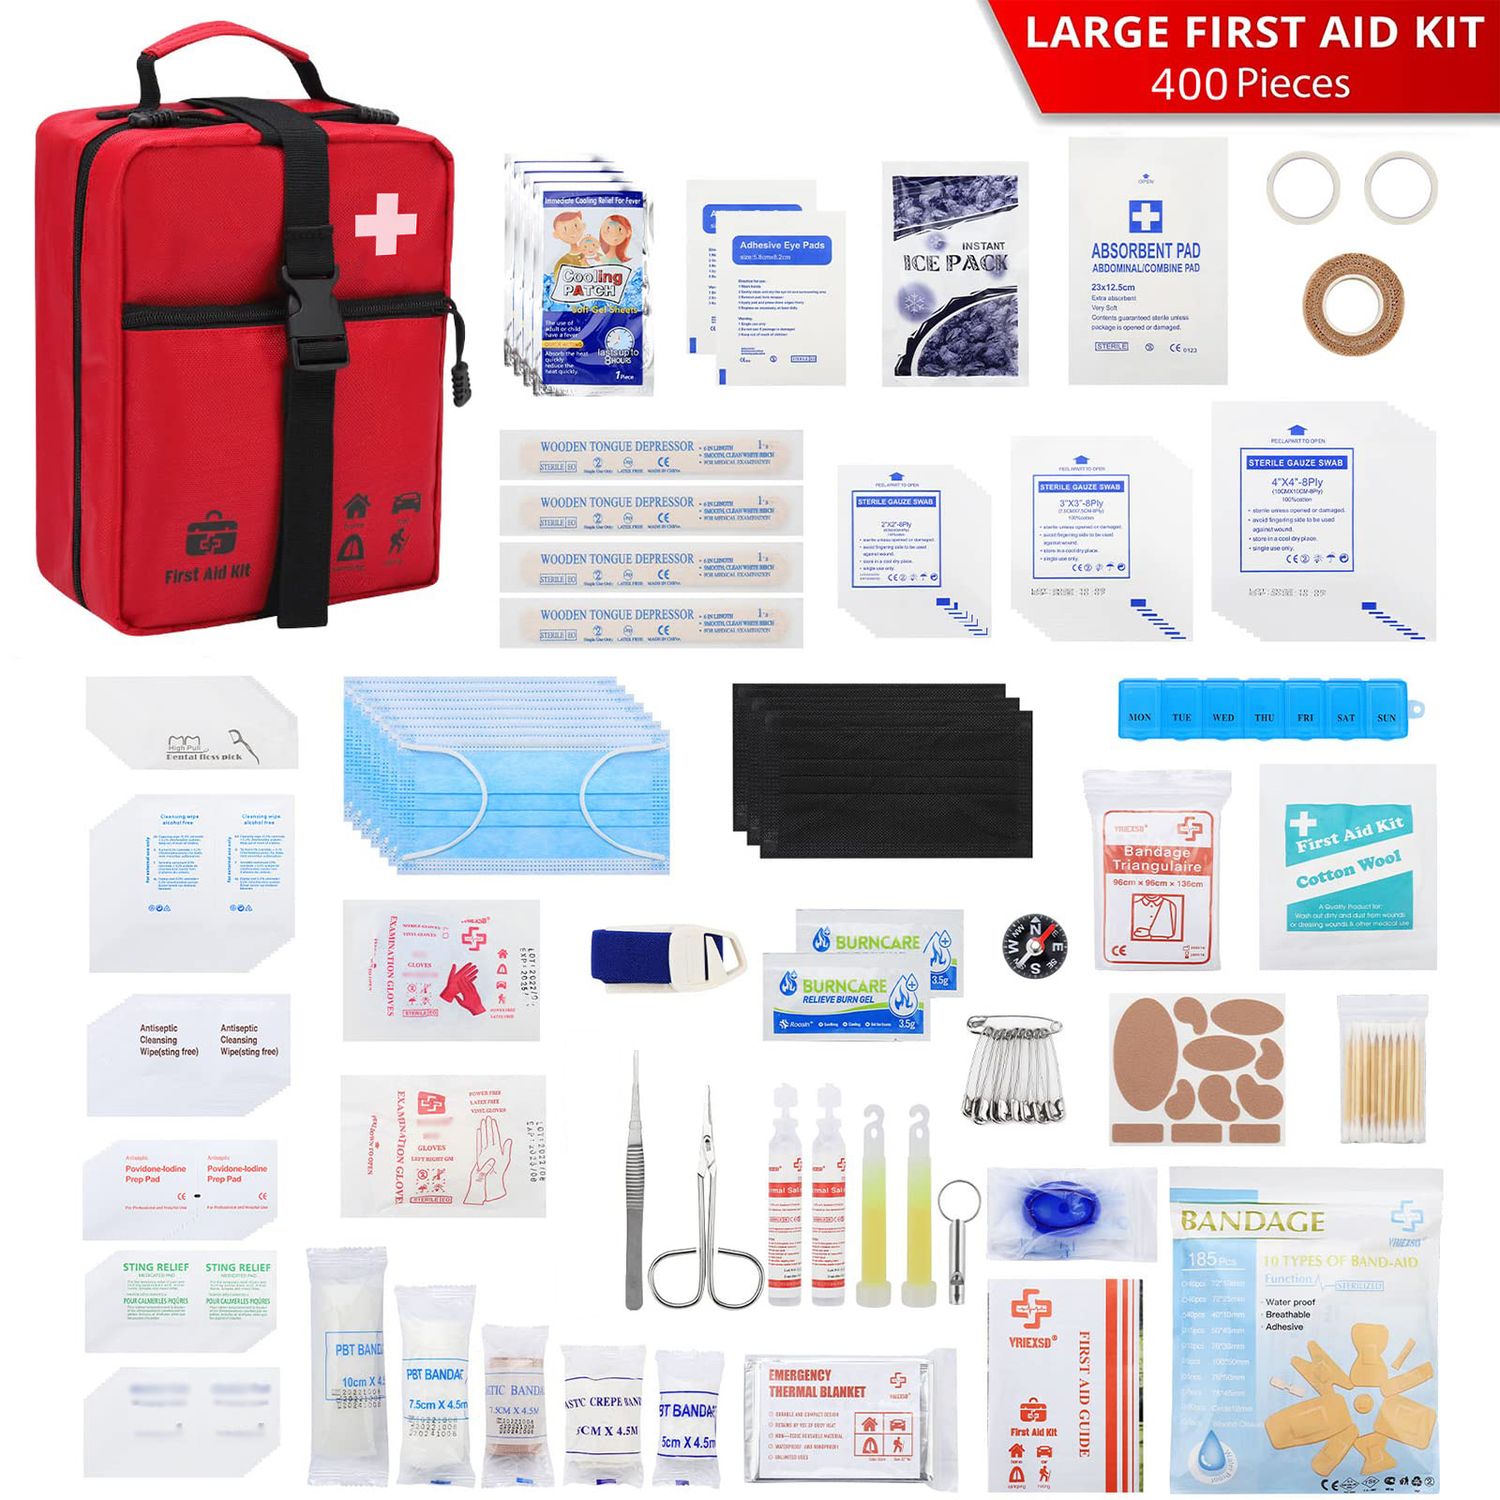 Content display of the large 400-piece emergency medical kit including first aid supplies like bandages and antiseptic wipes